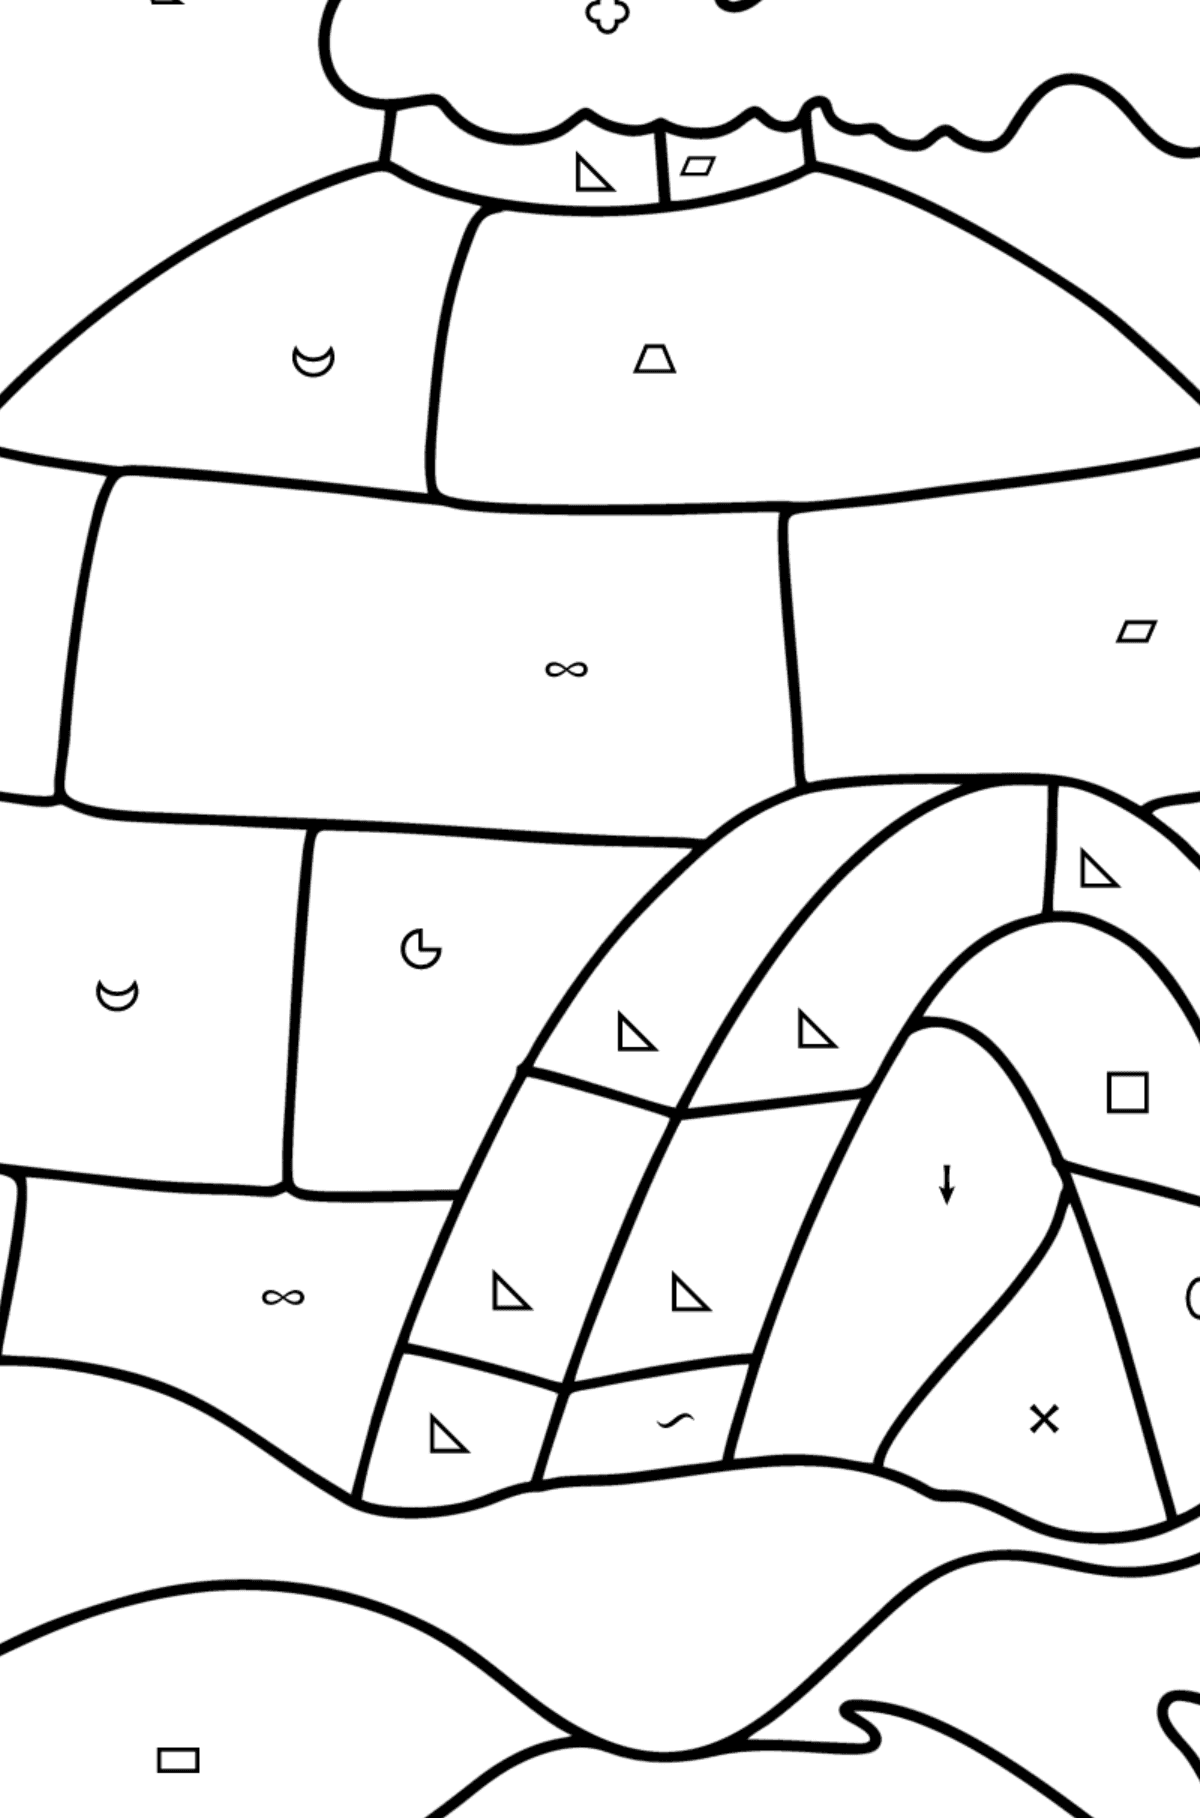 Igloo ice House coloring page - Coloring by Symbols and Geometric Shapes for Kids